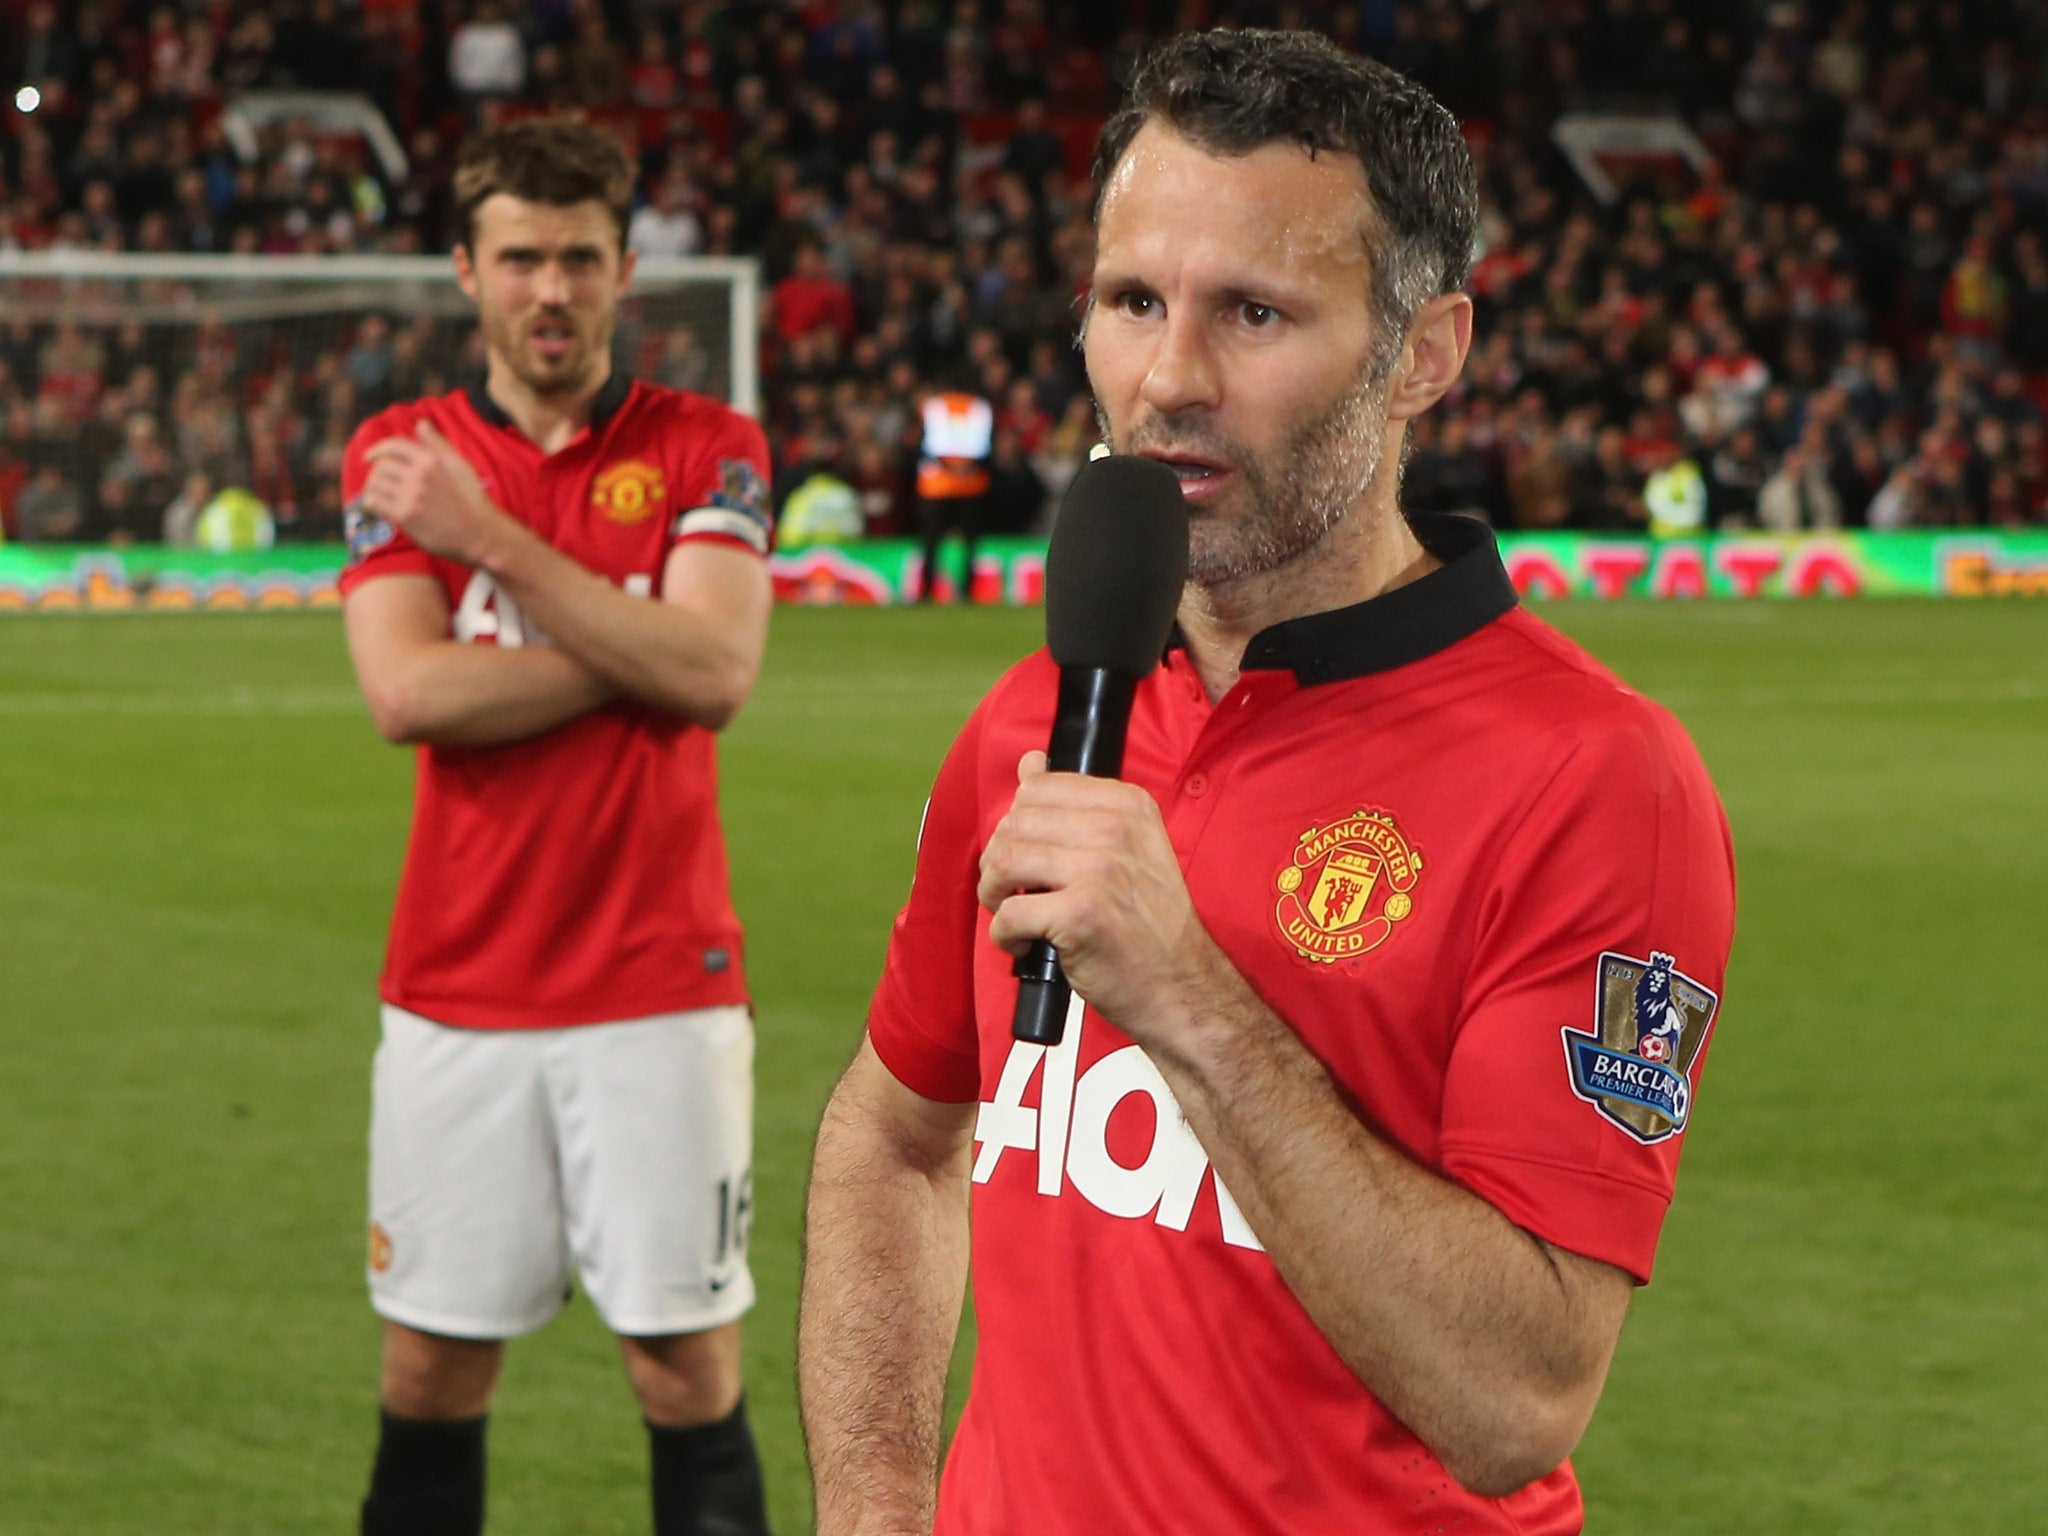 Ryan Giggs addresses the Old Trafford crowd after United's 3-1 win over Hull